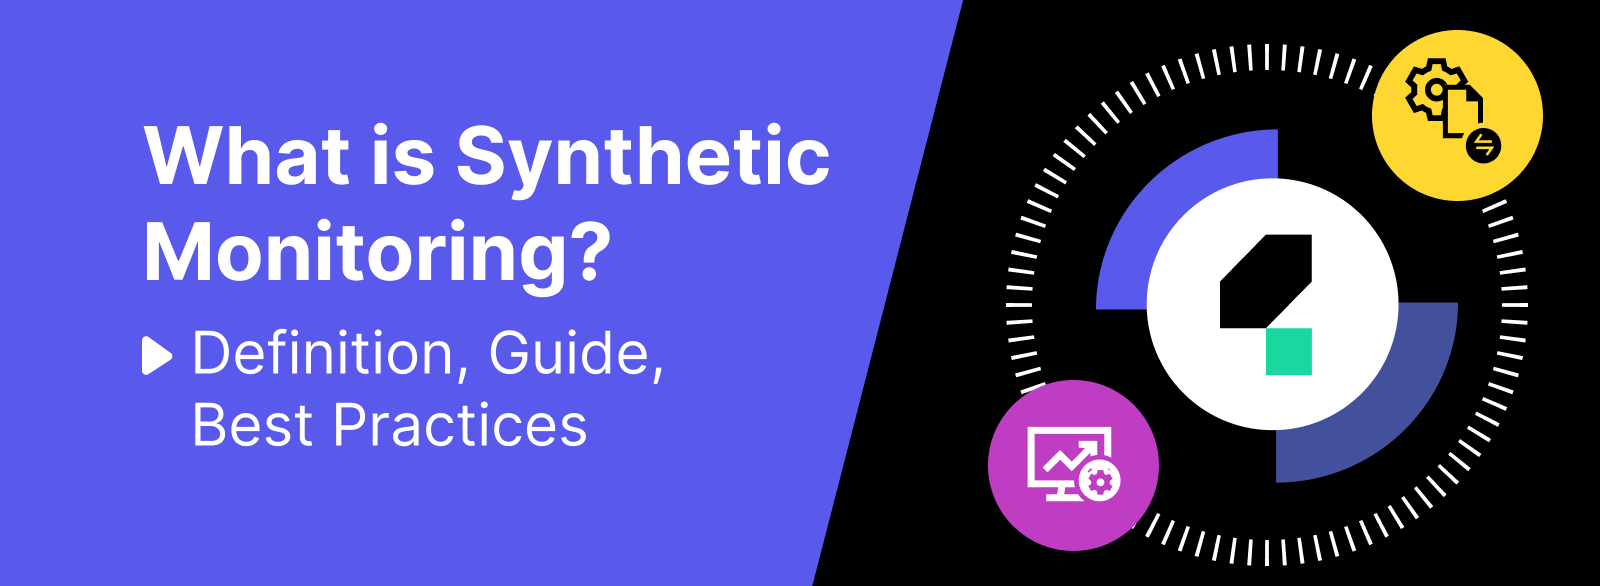 What is Synthetic Monitoring? Definition, Guide, Best Practices